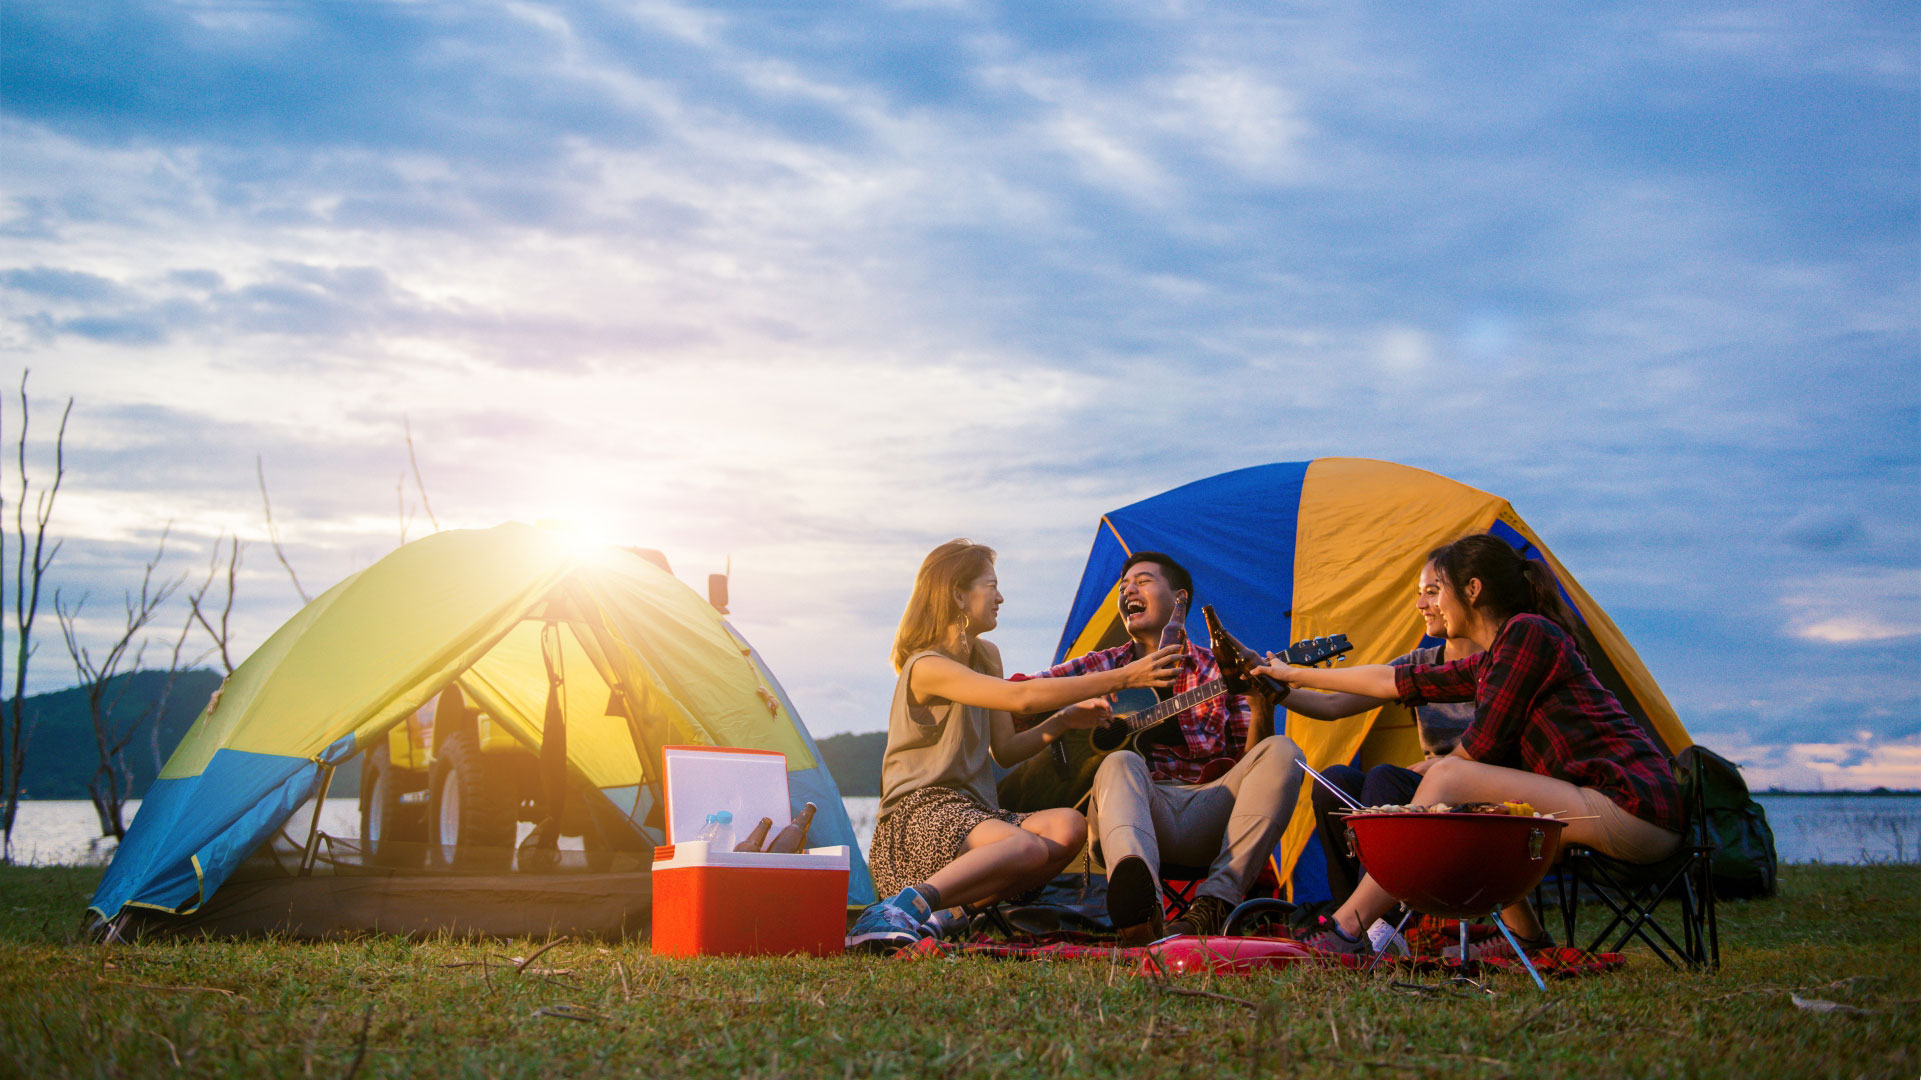 Essential products to plan your camping trip :